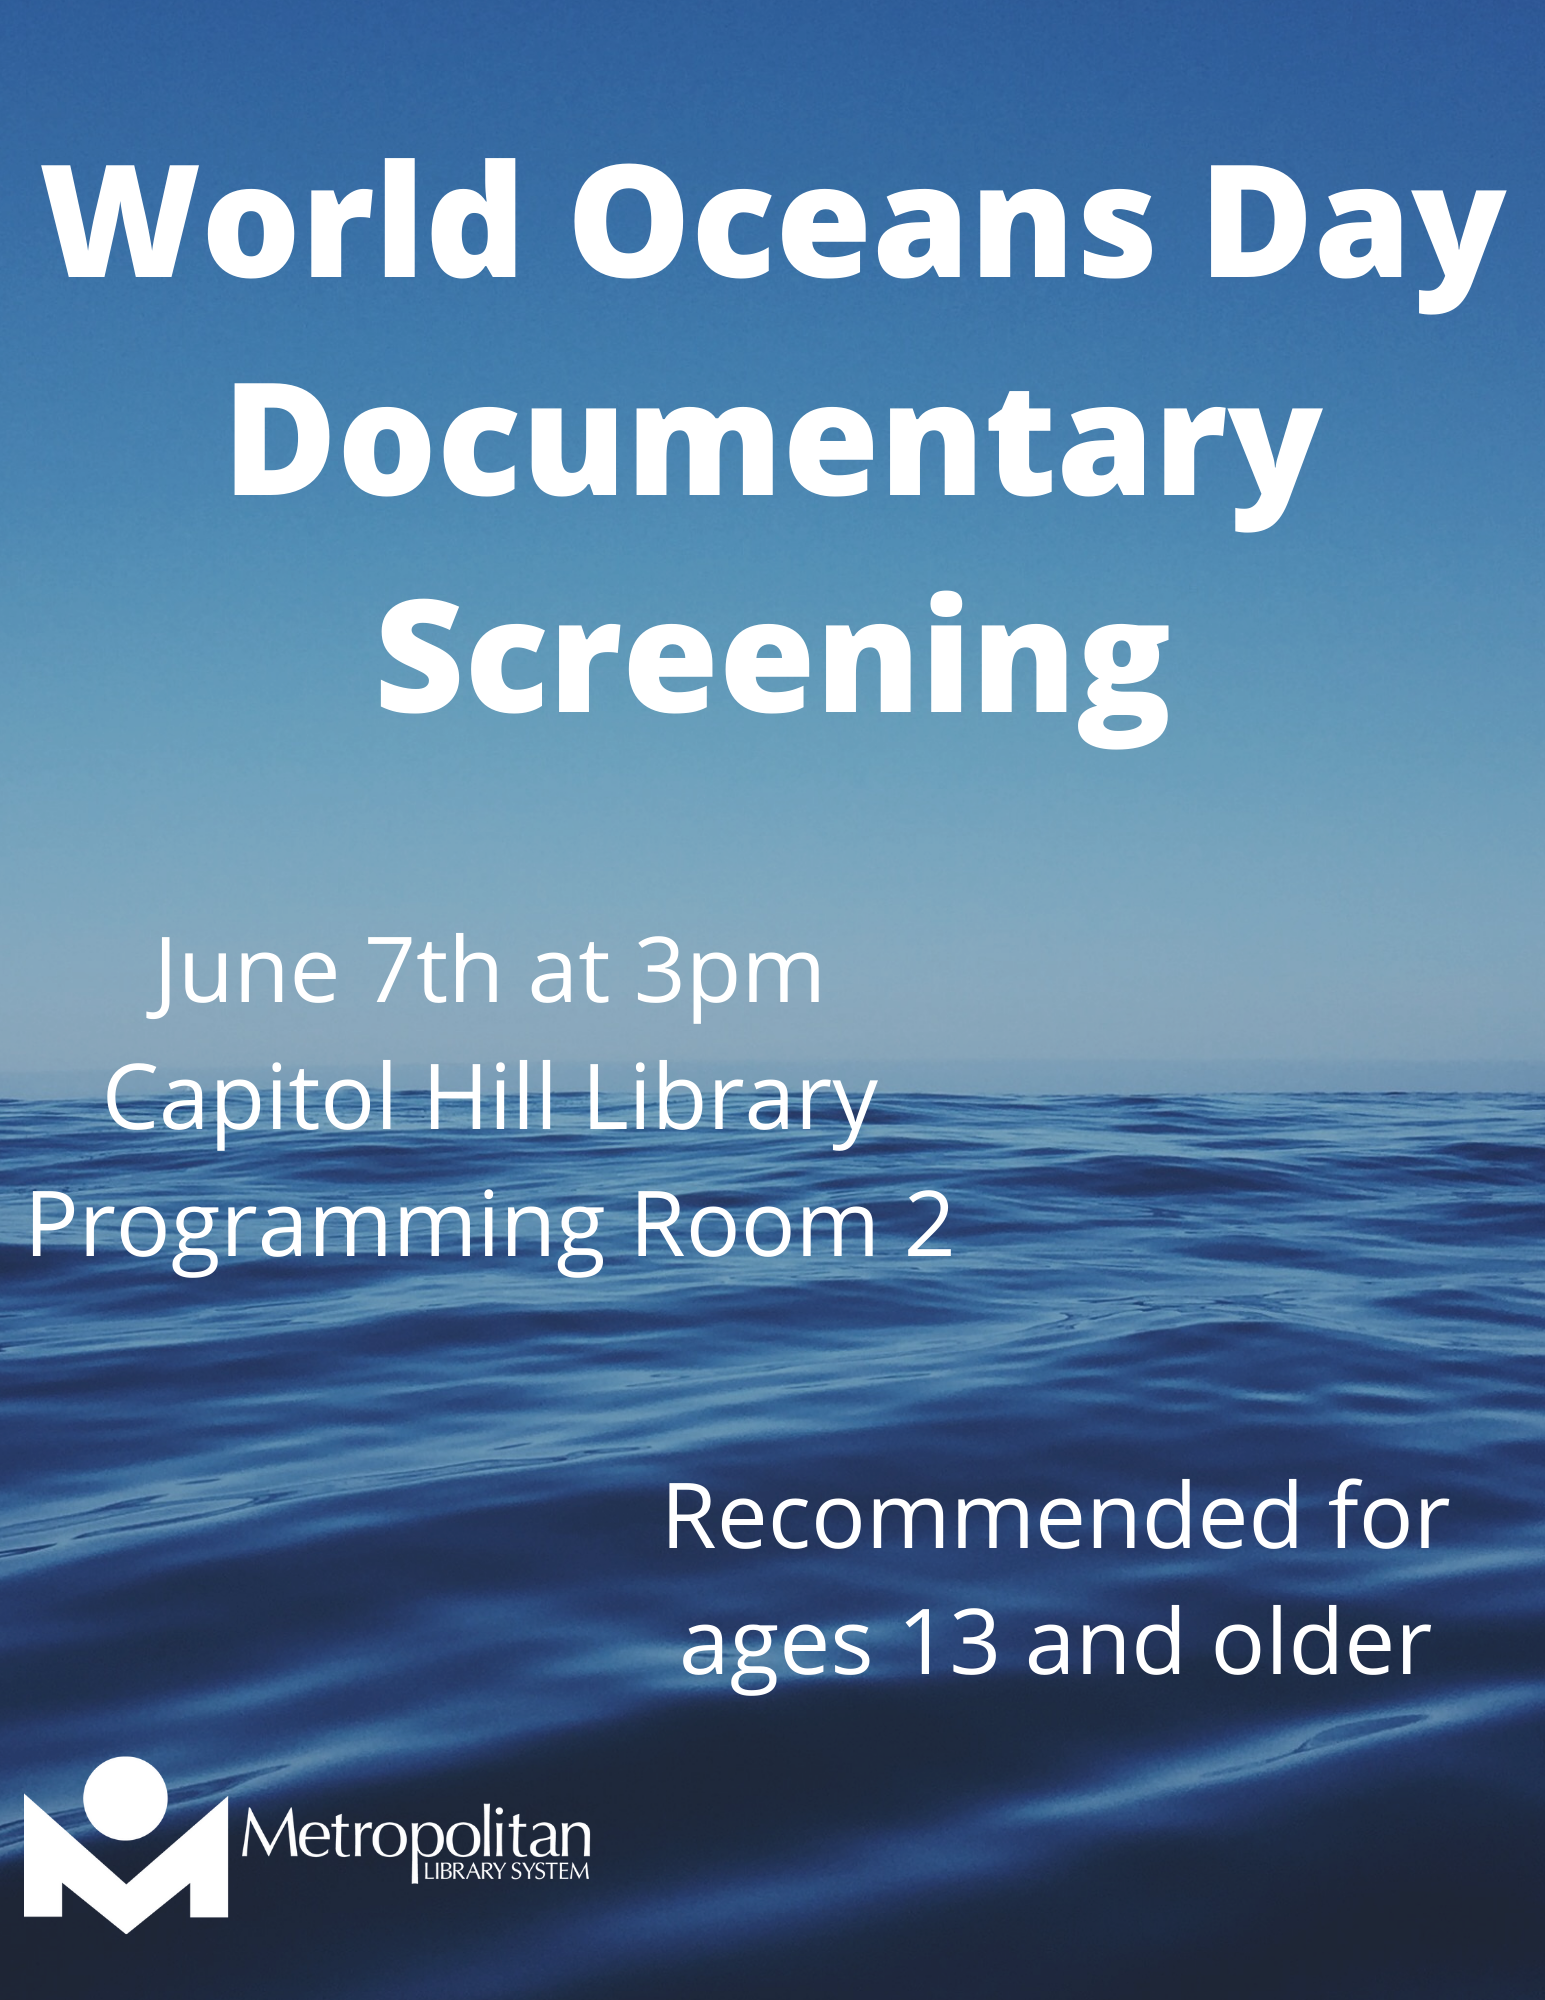 Information about documentary screening, also found in event description